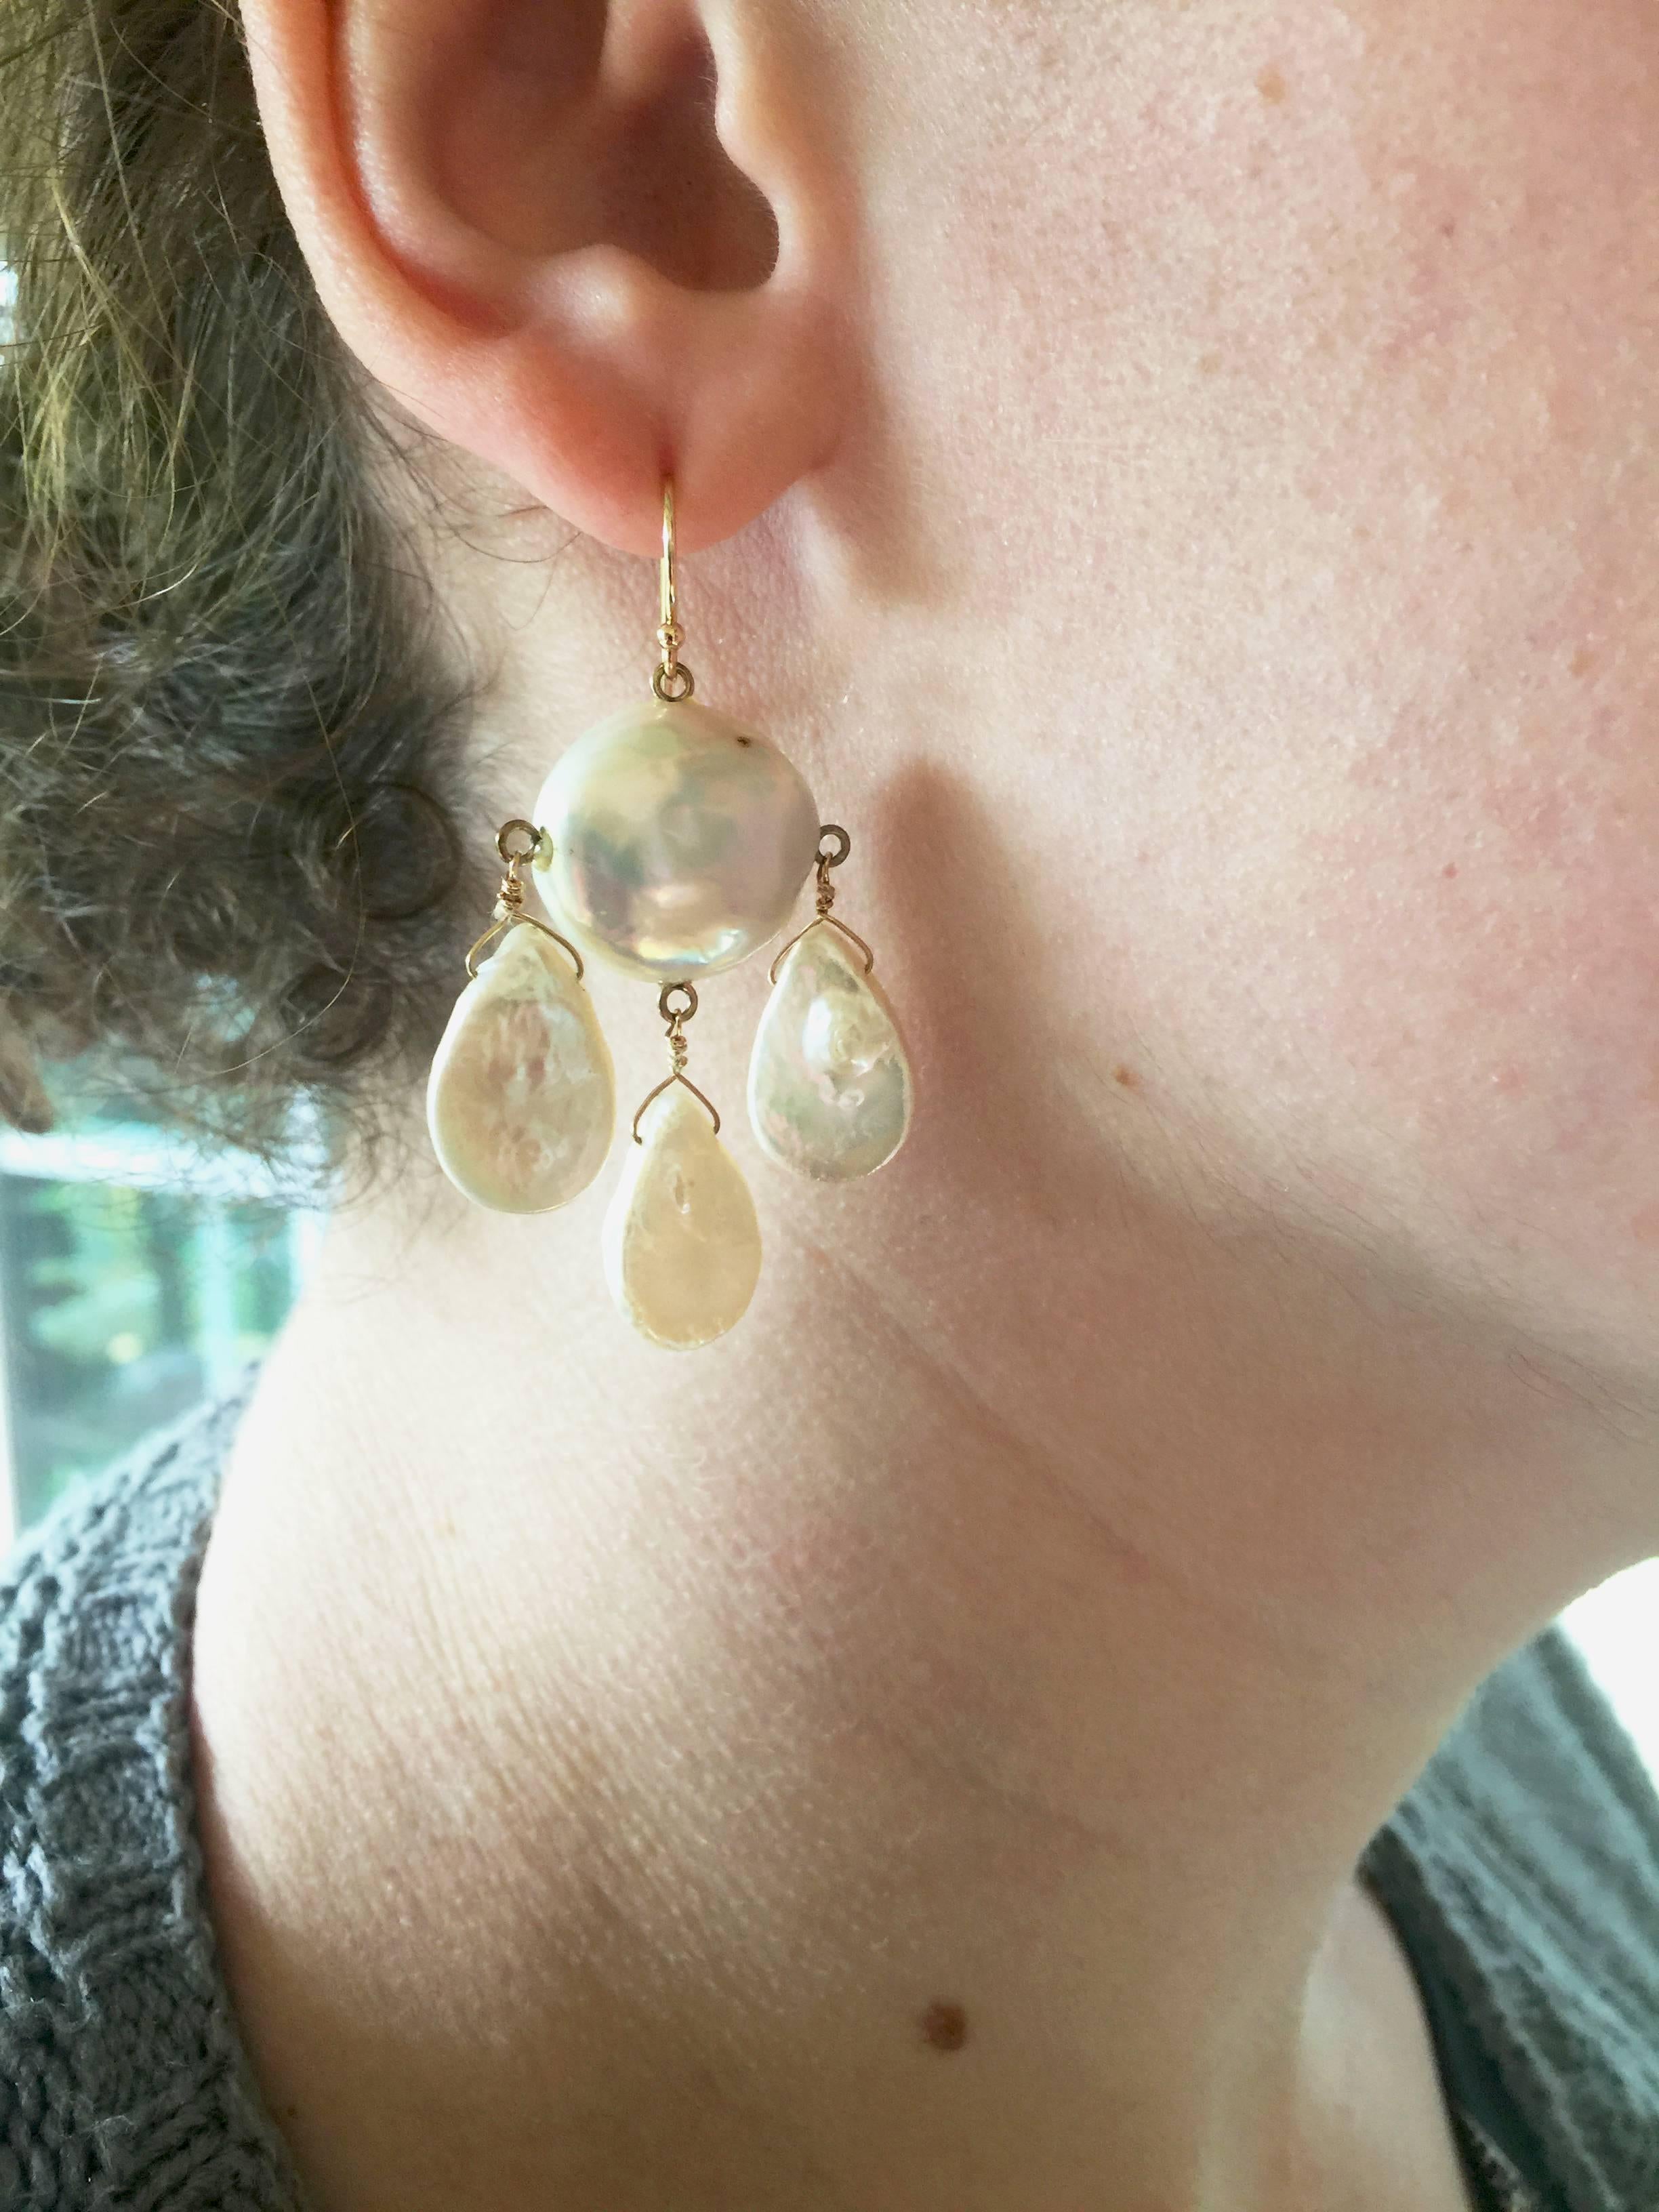 Three flat drop pearl hang a large baroque pearl by 14k gold wiring, make a bold statement perfect for the holidays. The imperfections of the earrings are what make these earrings one of a kind and catch the light, making them glisten as if still in